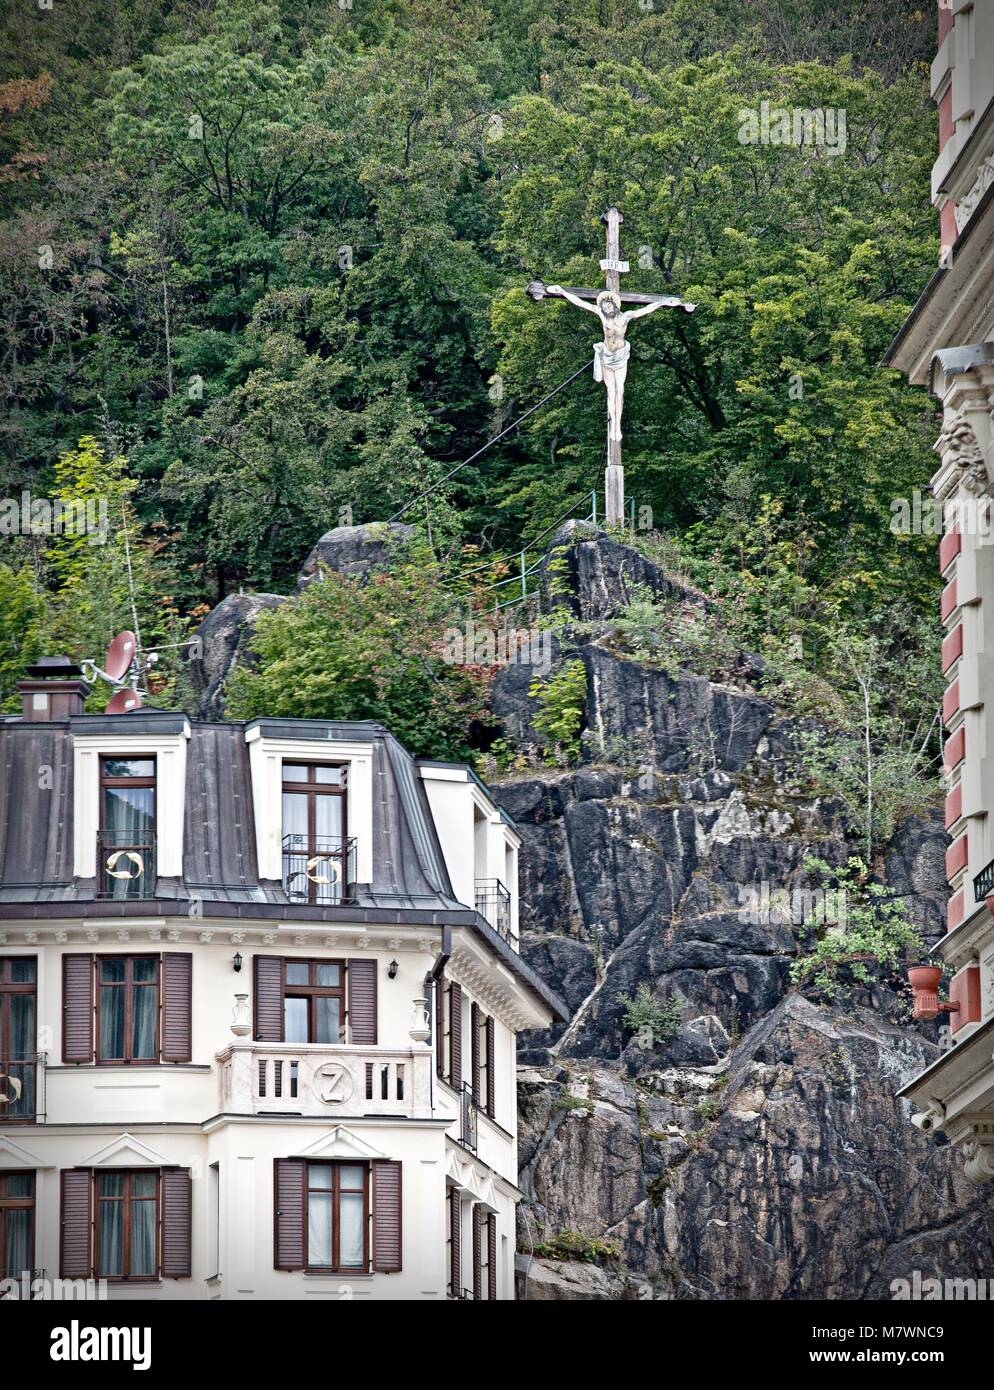 CHRIST ON THE CROSS ABOVE THE HOUSES IN KARLOVA VARY CHZECH REPUBLIC Stock Photo